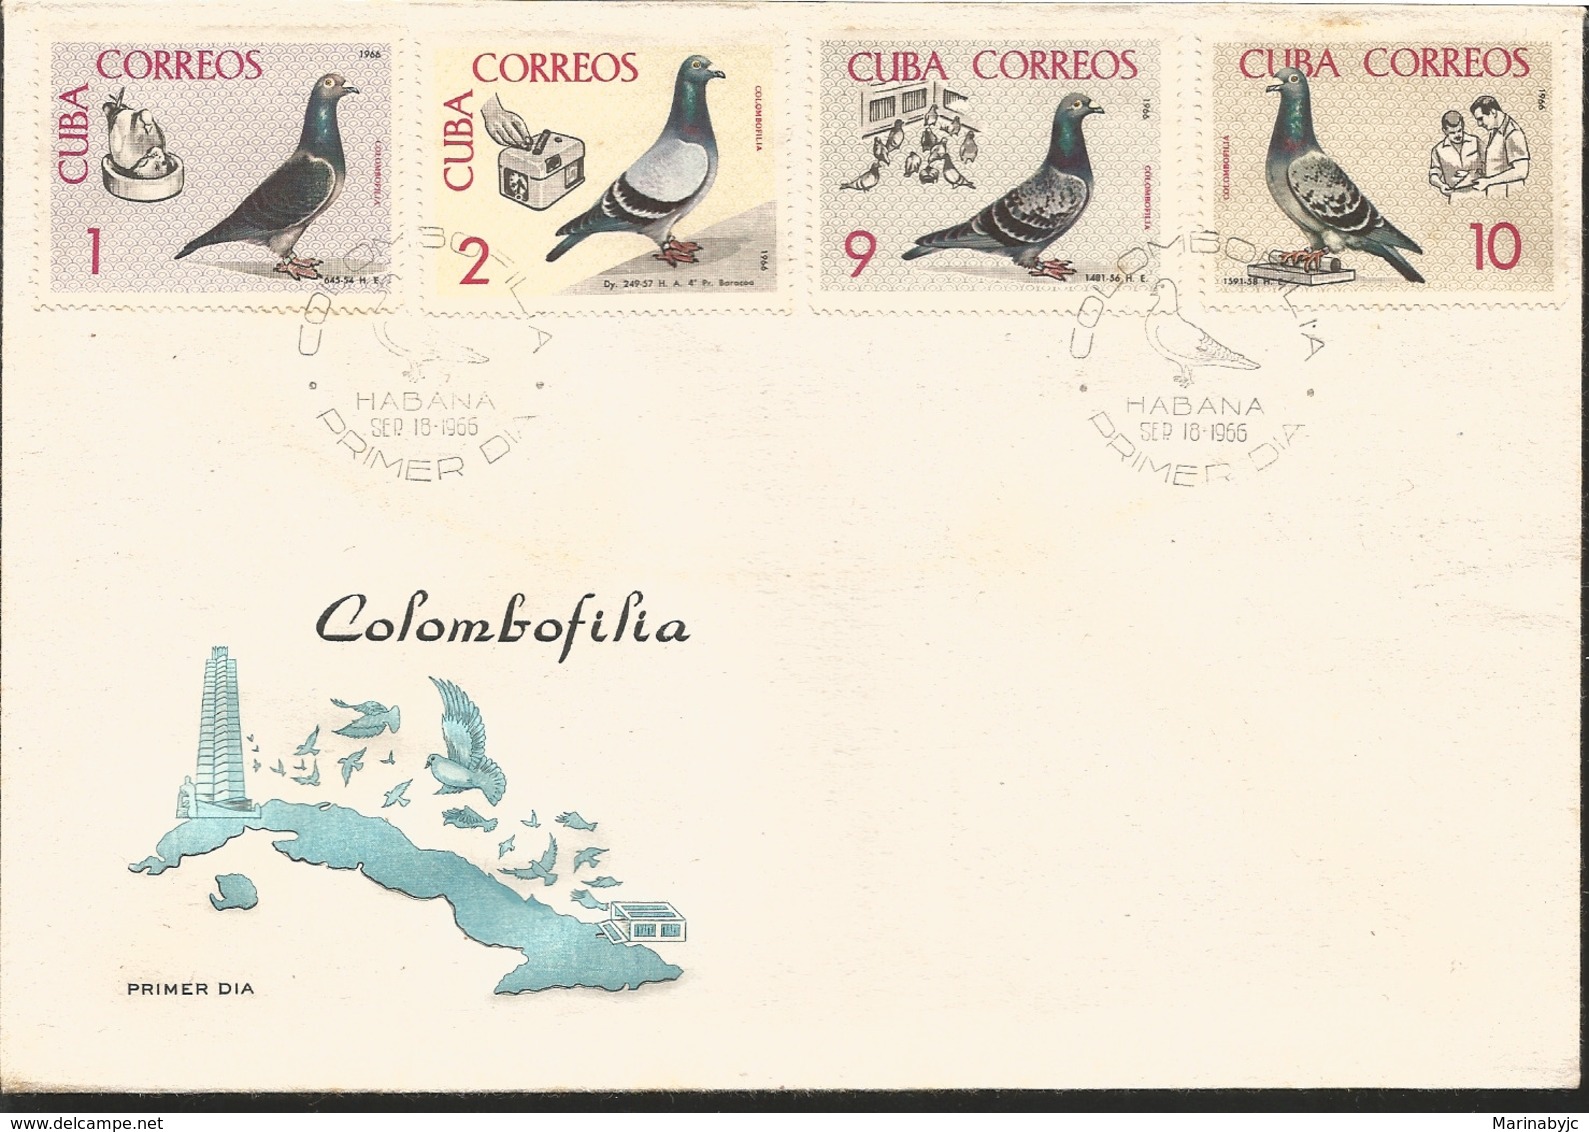 V) 1966 CARIBBEAN, BREEDING MESSENGER PIGEONS, PIGEONS IN YARD, TWO MEN, MESSAGE, WITH SLOGAN CANCELATION IN BLACK, FDC - Covers & Documents